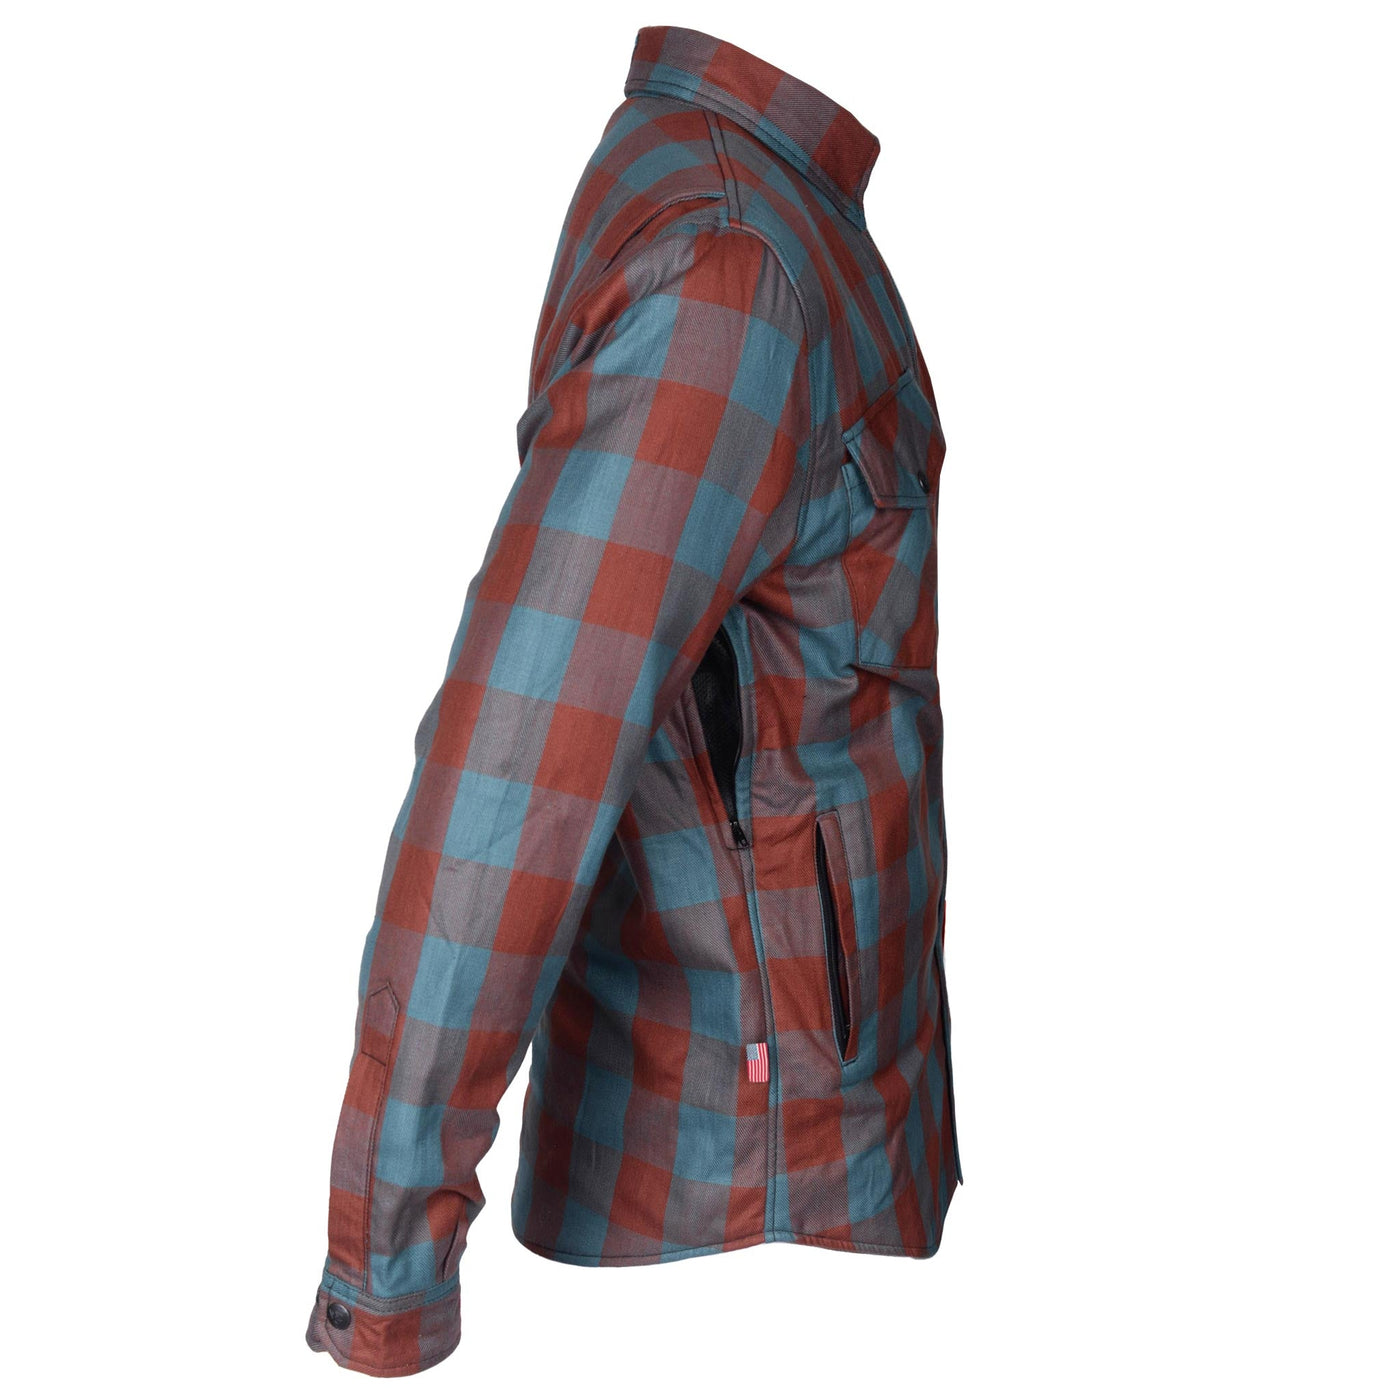 Protective Flannel Shirt with Pads "Teal Trail" - Light Brown and Teal Checkered